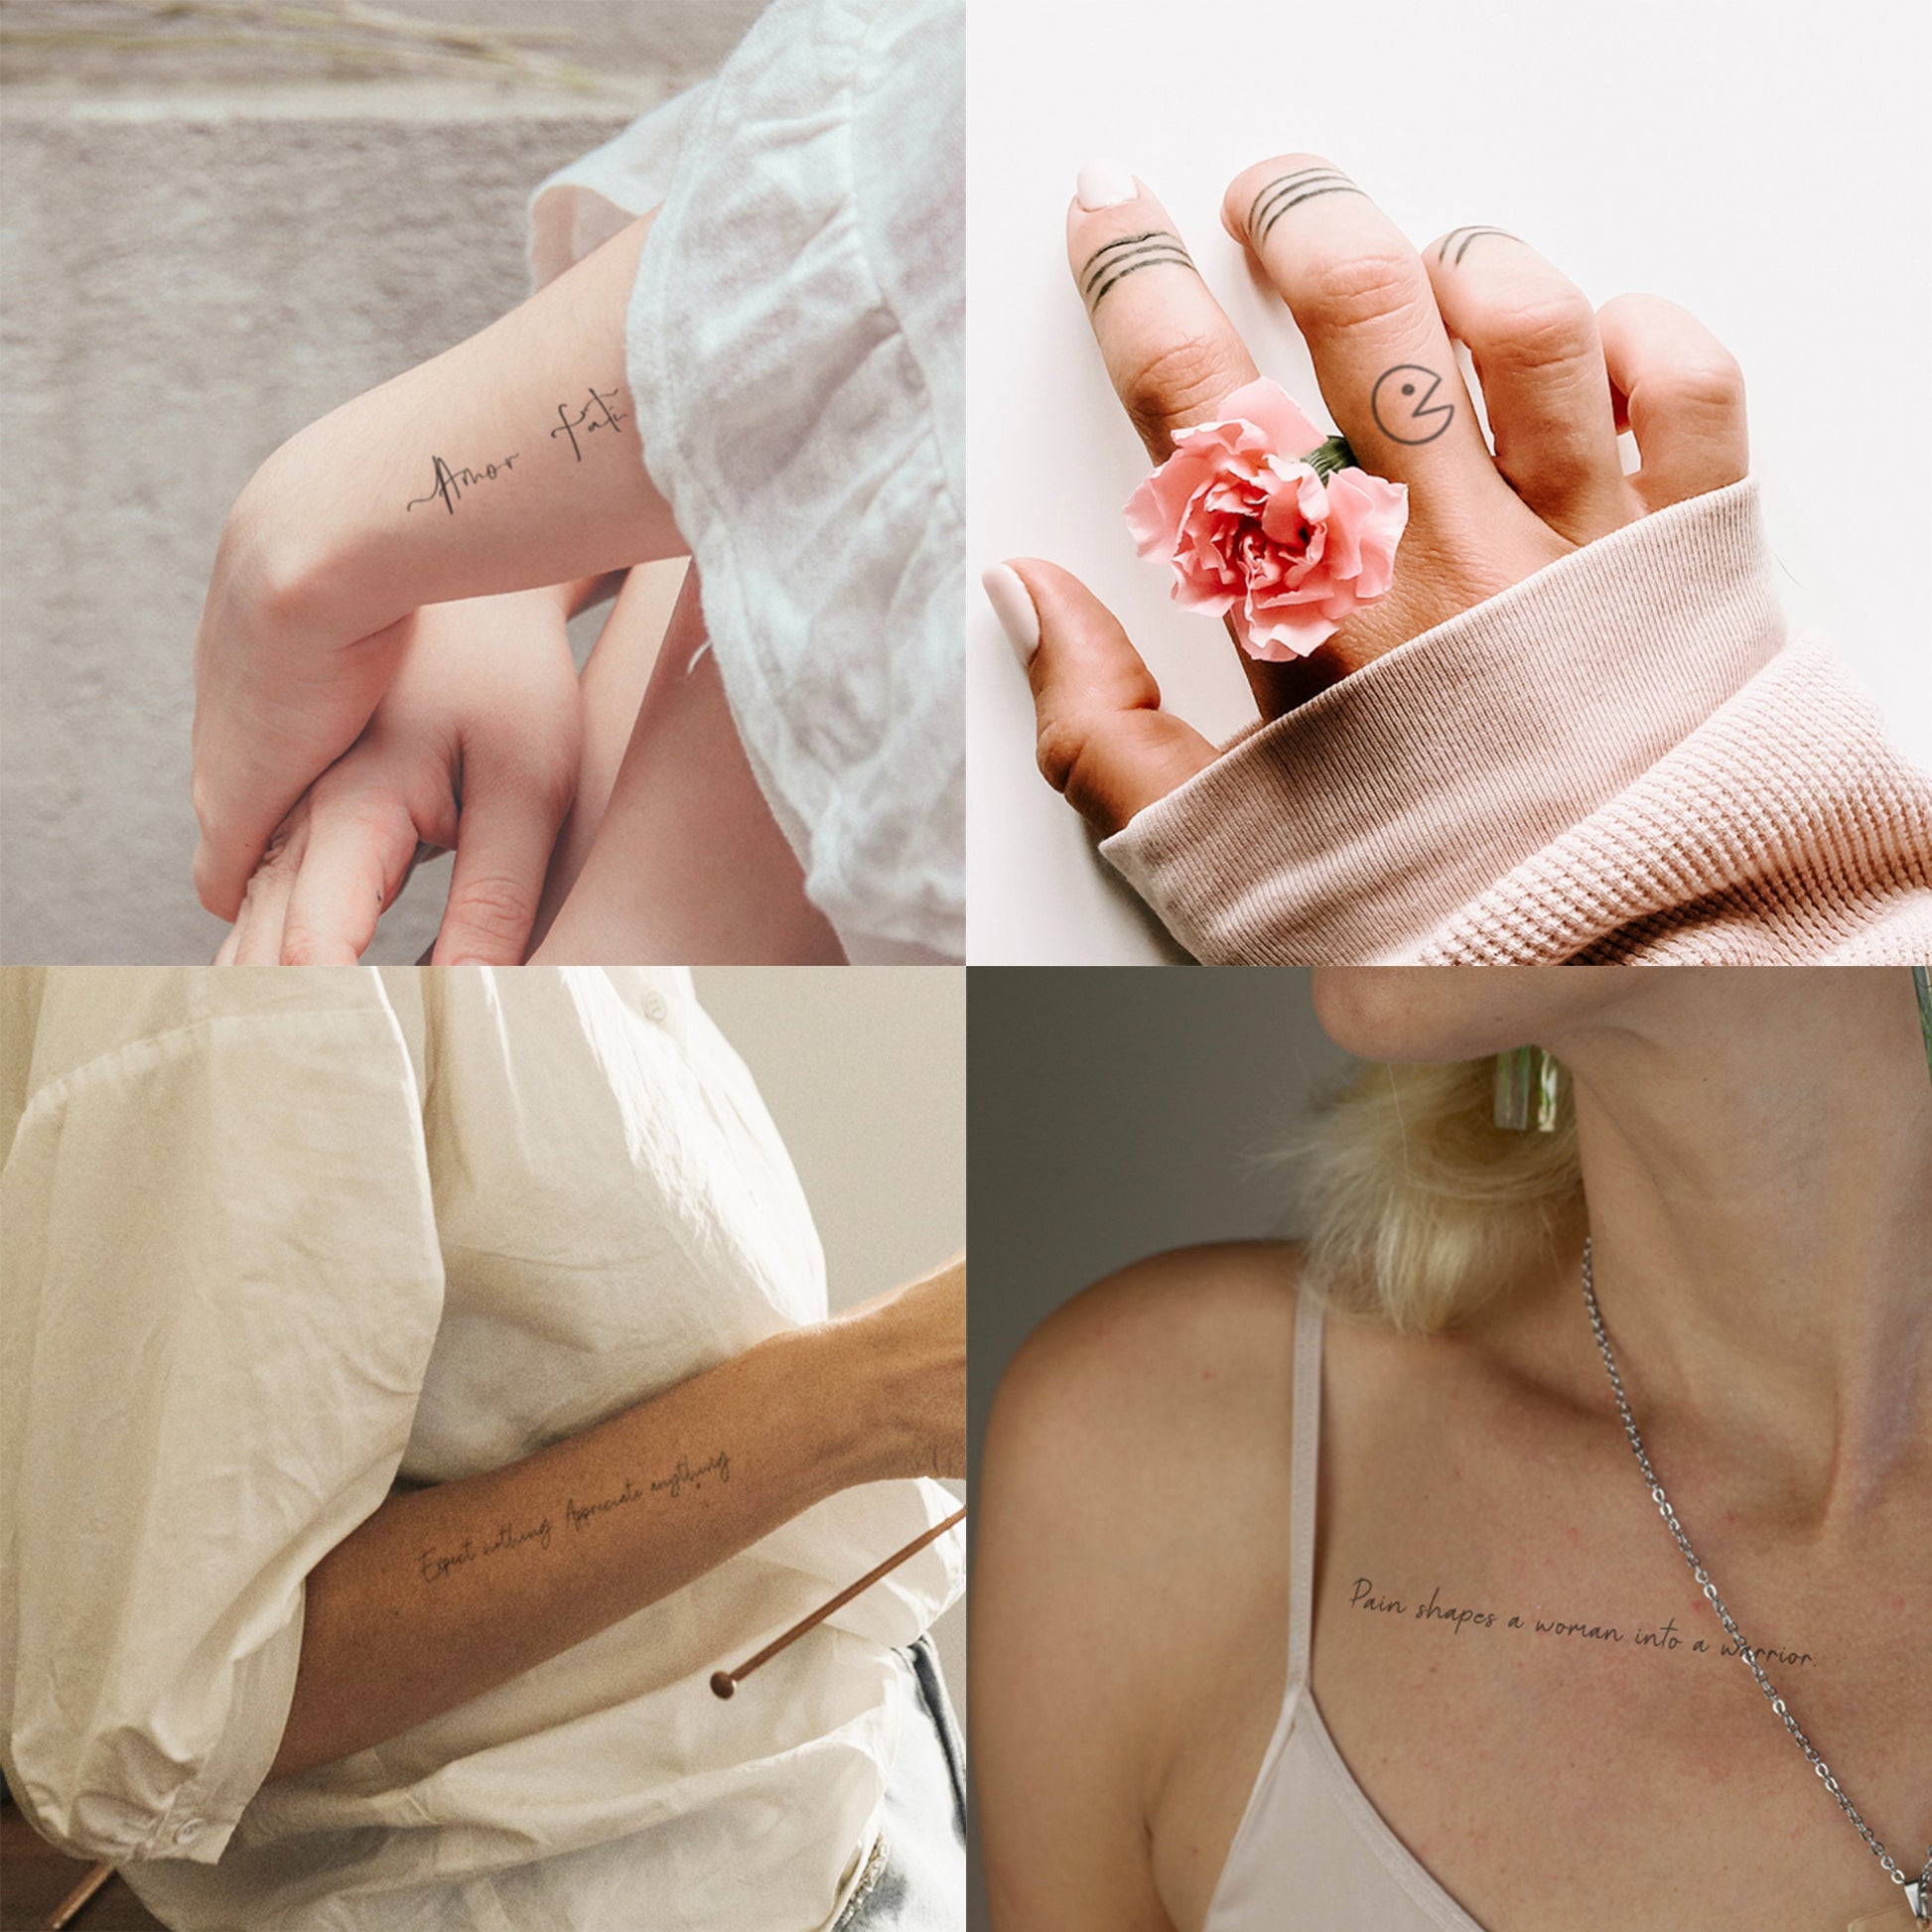 meaningful saying tattoos for women